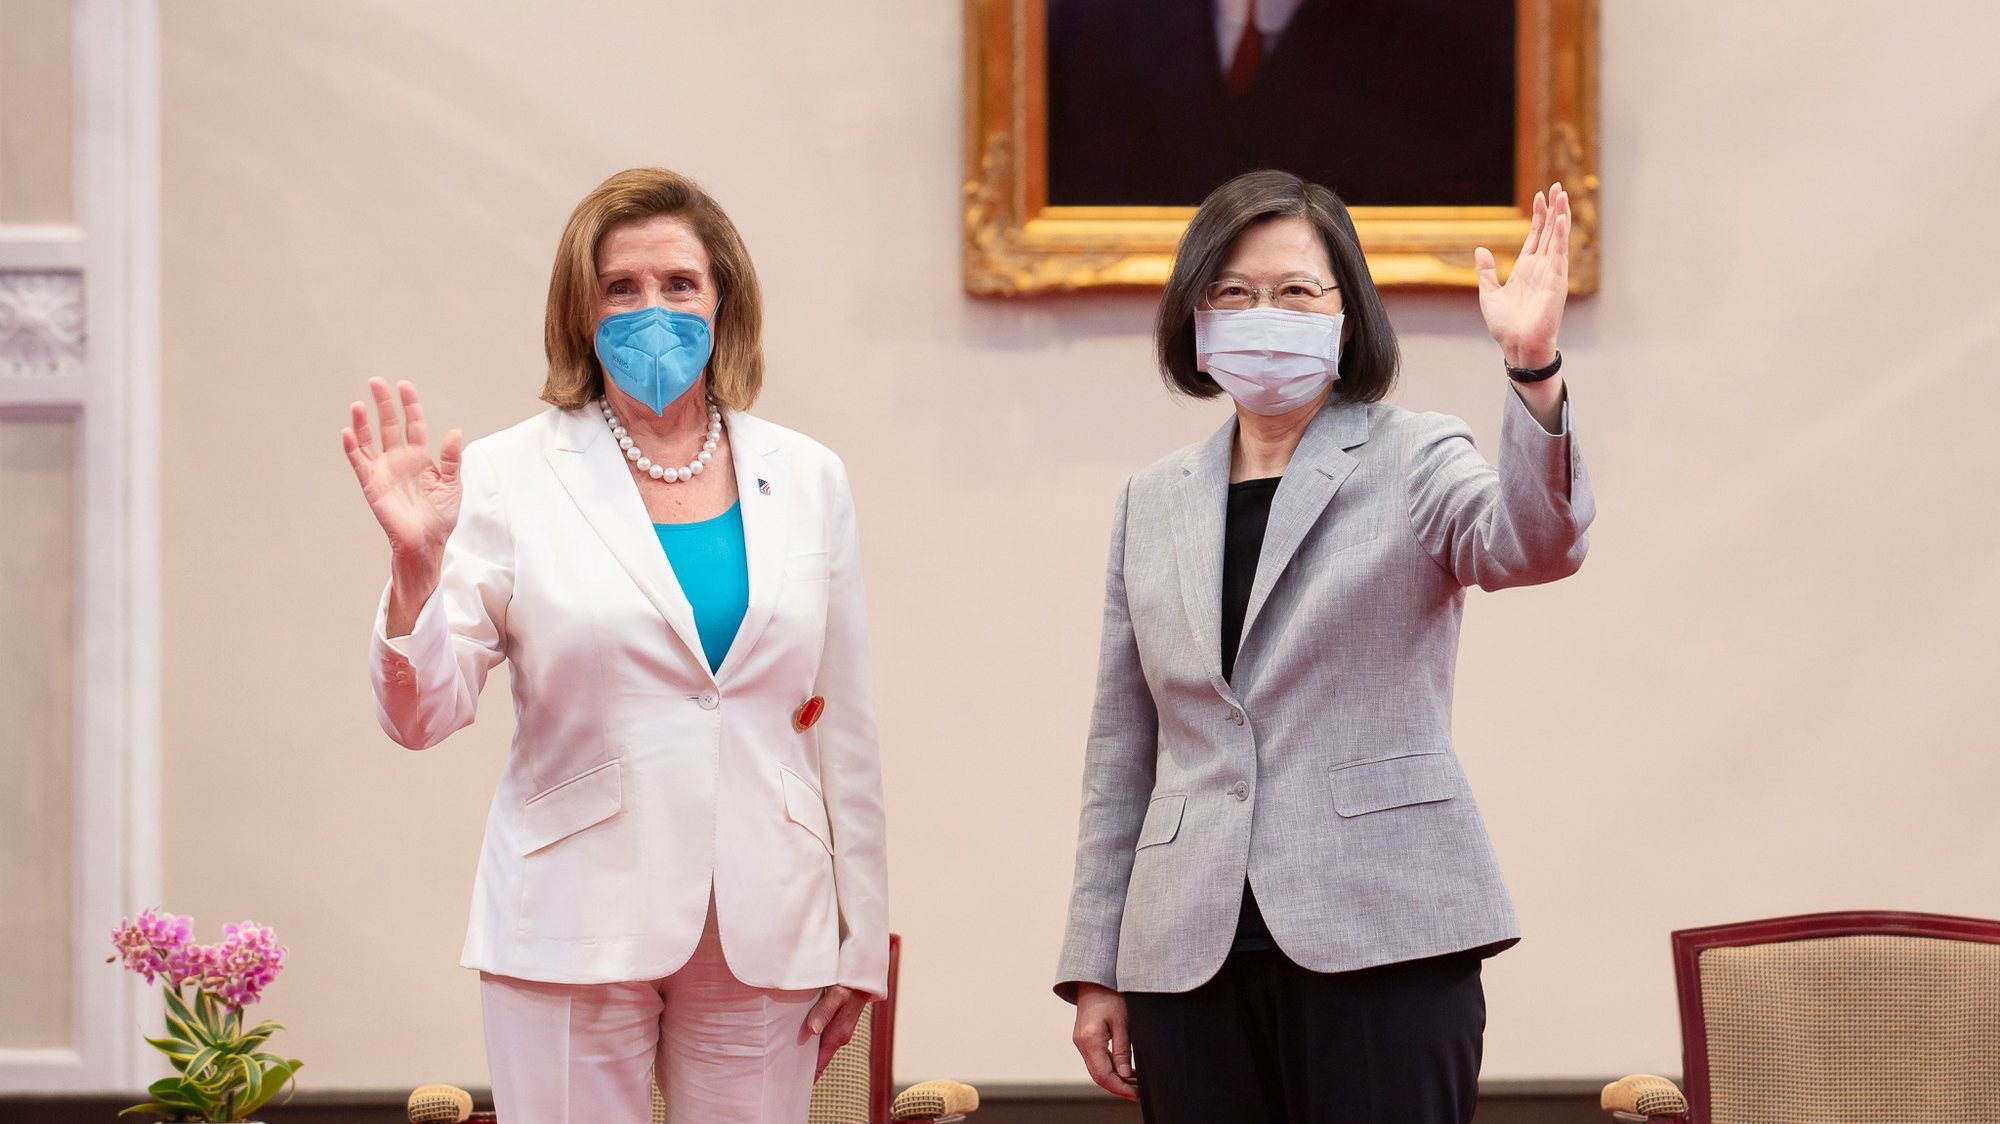 epa10103537 A handout photo made available by the Taiwan Presidential office shows Taiwan President Tsai Ing-wen (R) and US House Speaker Nancy Pelosi waving as they pose for photos during their meeting at the Presidential Palace in Taipei, Taiwan, 03 August 2022. Pelosi, the highest ranking US official to visit the island in 25 years, began her visit in Taiwan despite strong warnings of military action from China against the visit.  EPA/TAIWAN PRESIDENTIAL PALACE HANDOUT  HANDOUT EDITORIAL USE ONLY/NO SALES